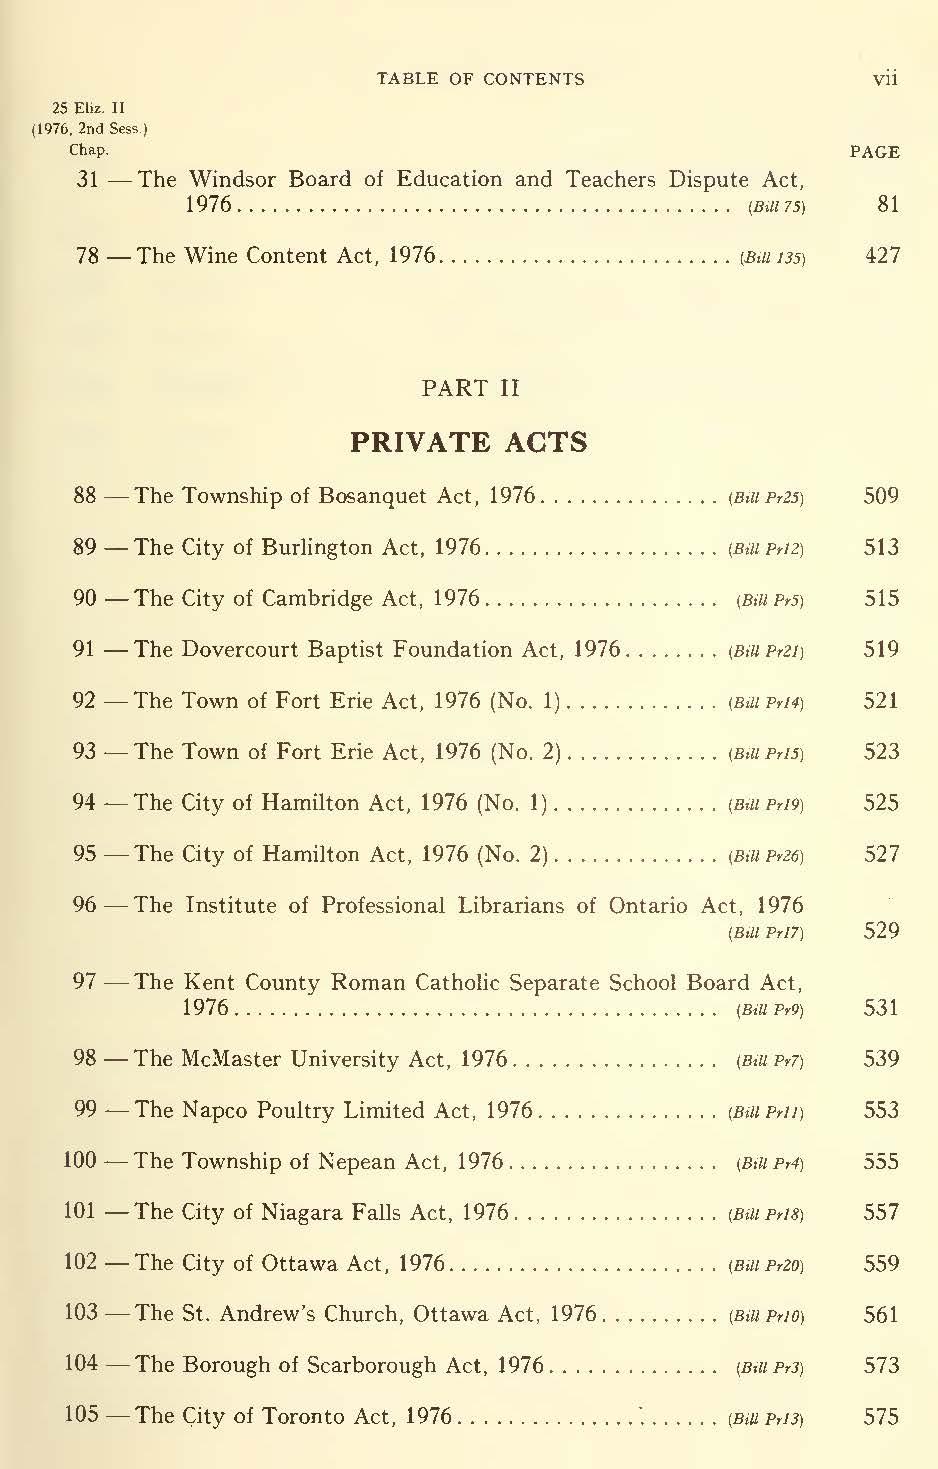 25 Eliz. II vii 31 - The Windsor Board of Education and Teachers Dispute Act, 1976.......................................... (Bill 75) 81 78 - The Wine Content Act, 1976.